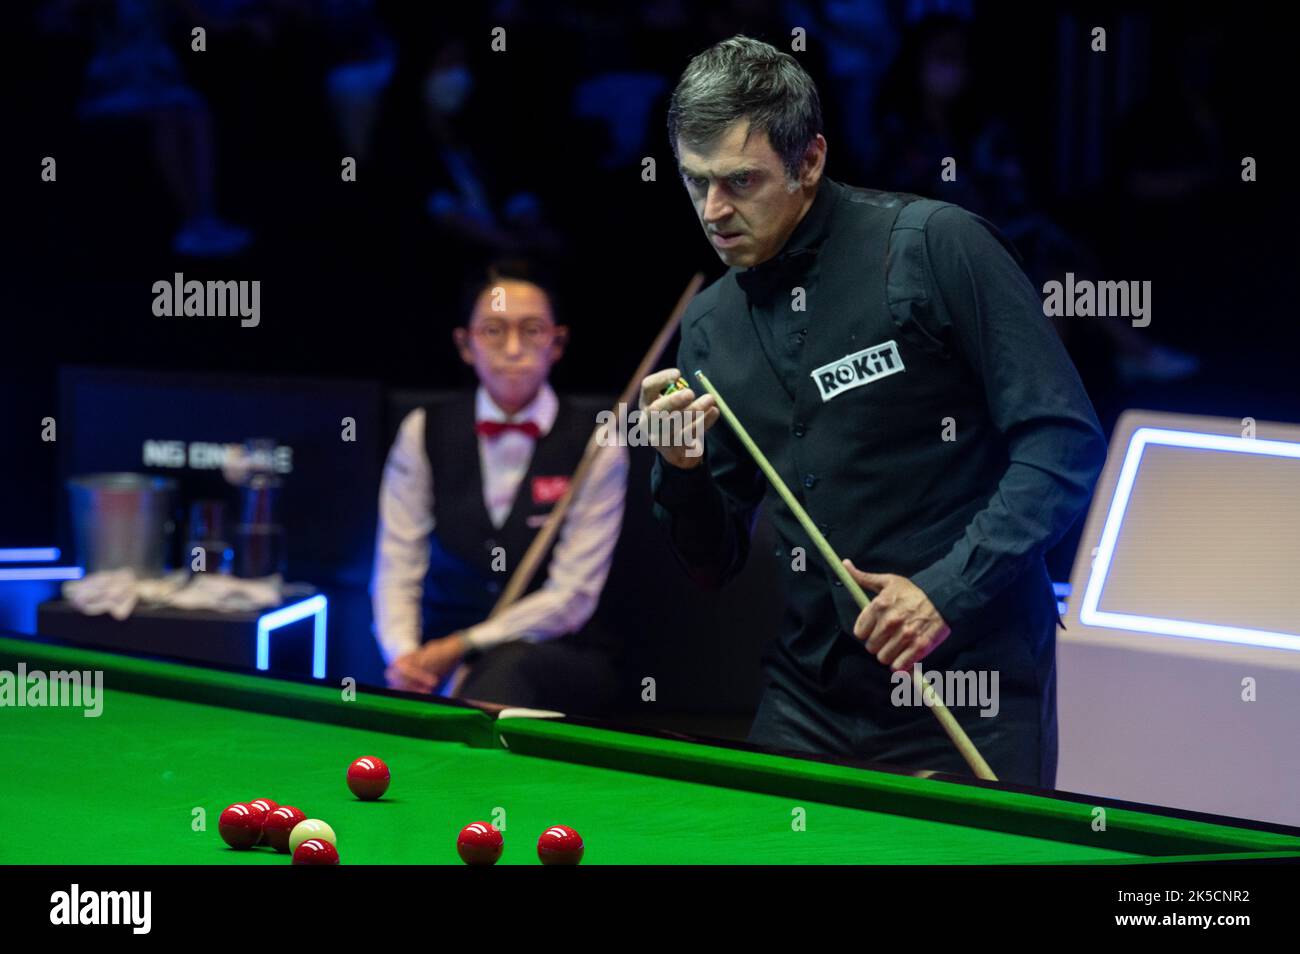 Hong Kong, China. 07th Oct, 2022. Current world champion and world number one English player Ronnie O'Sullivan (R) seen in action during the fourth quarter-final match of Hong Kong Masters snooker tournament against Hongkonger Ng On Yee (L). Final score; Ronnie O'Sullivan 5:0 Ng On Yee. Credit: SOPA Images Limited/Alamy Live News Stock Photo